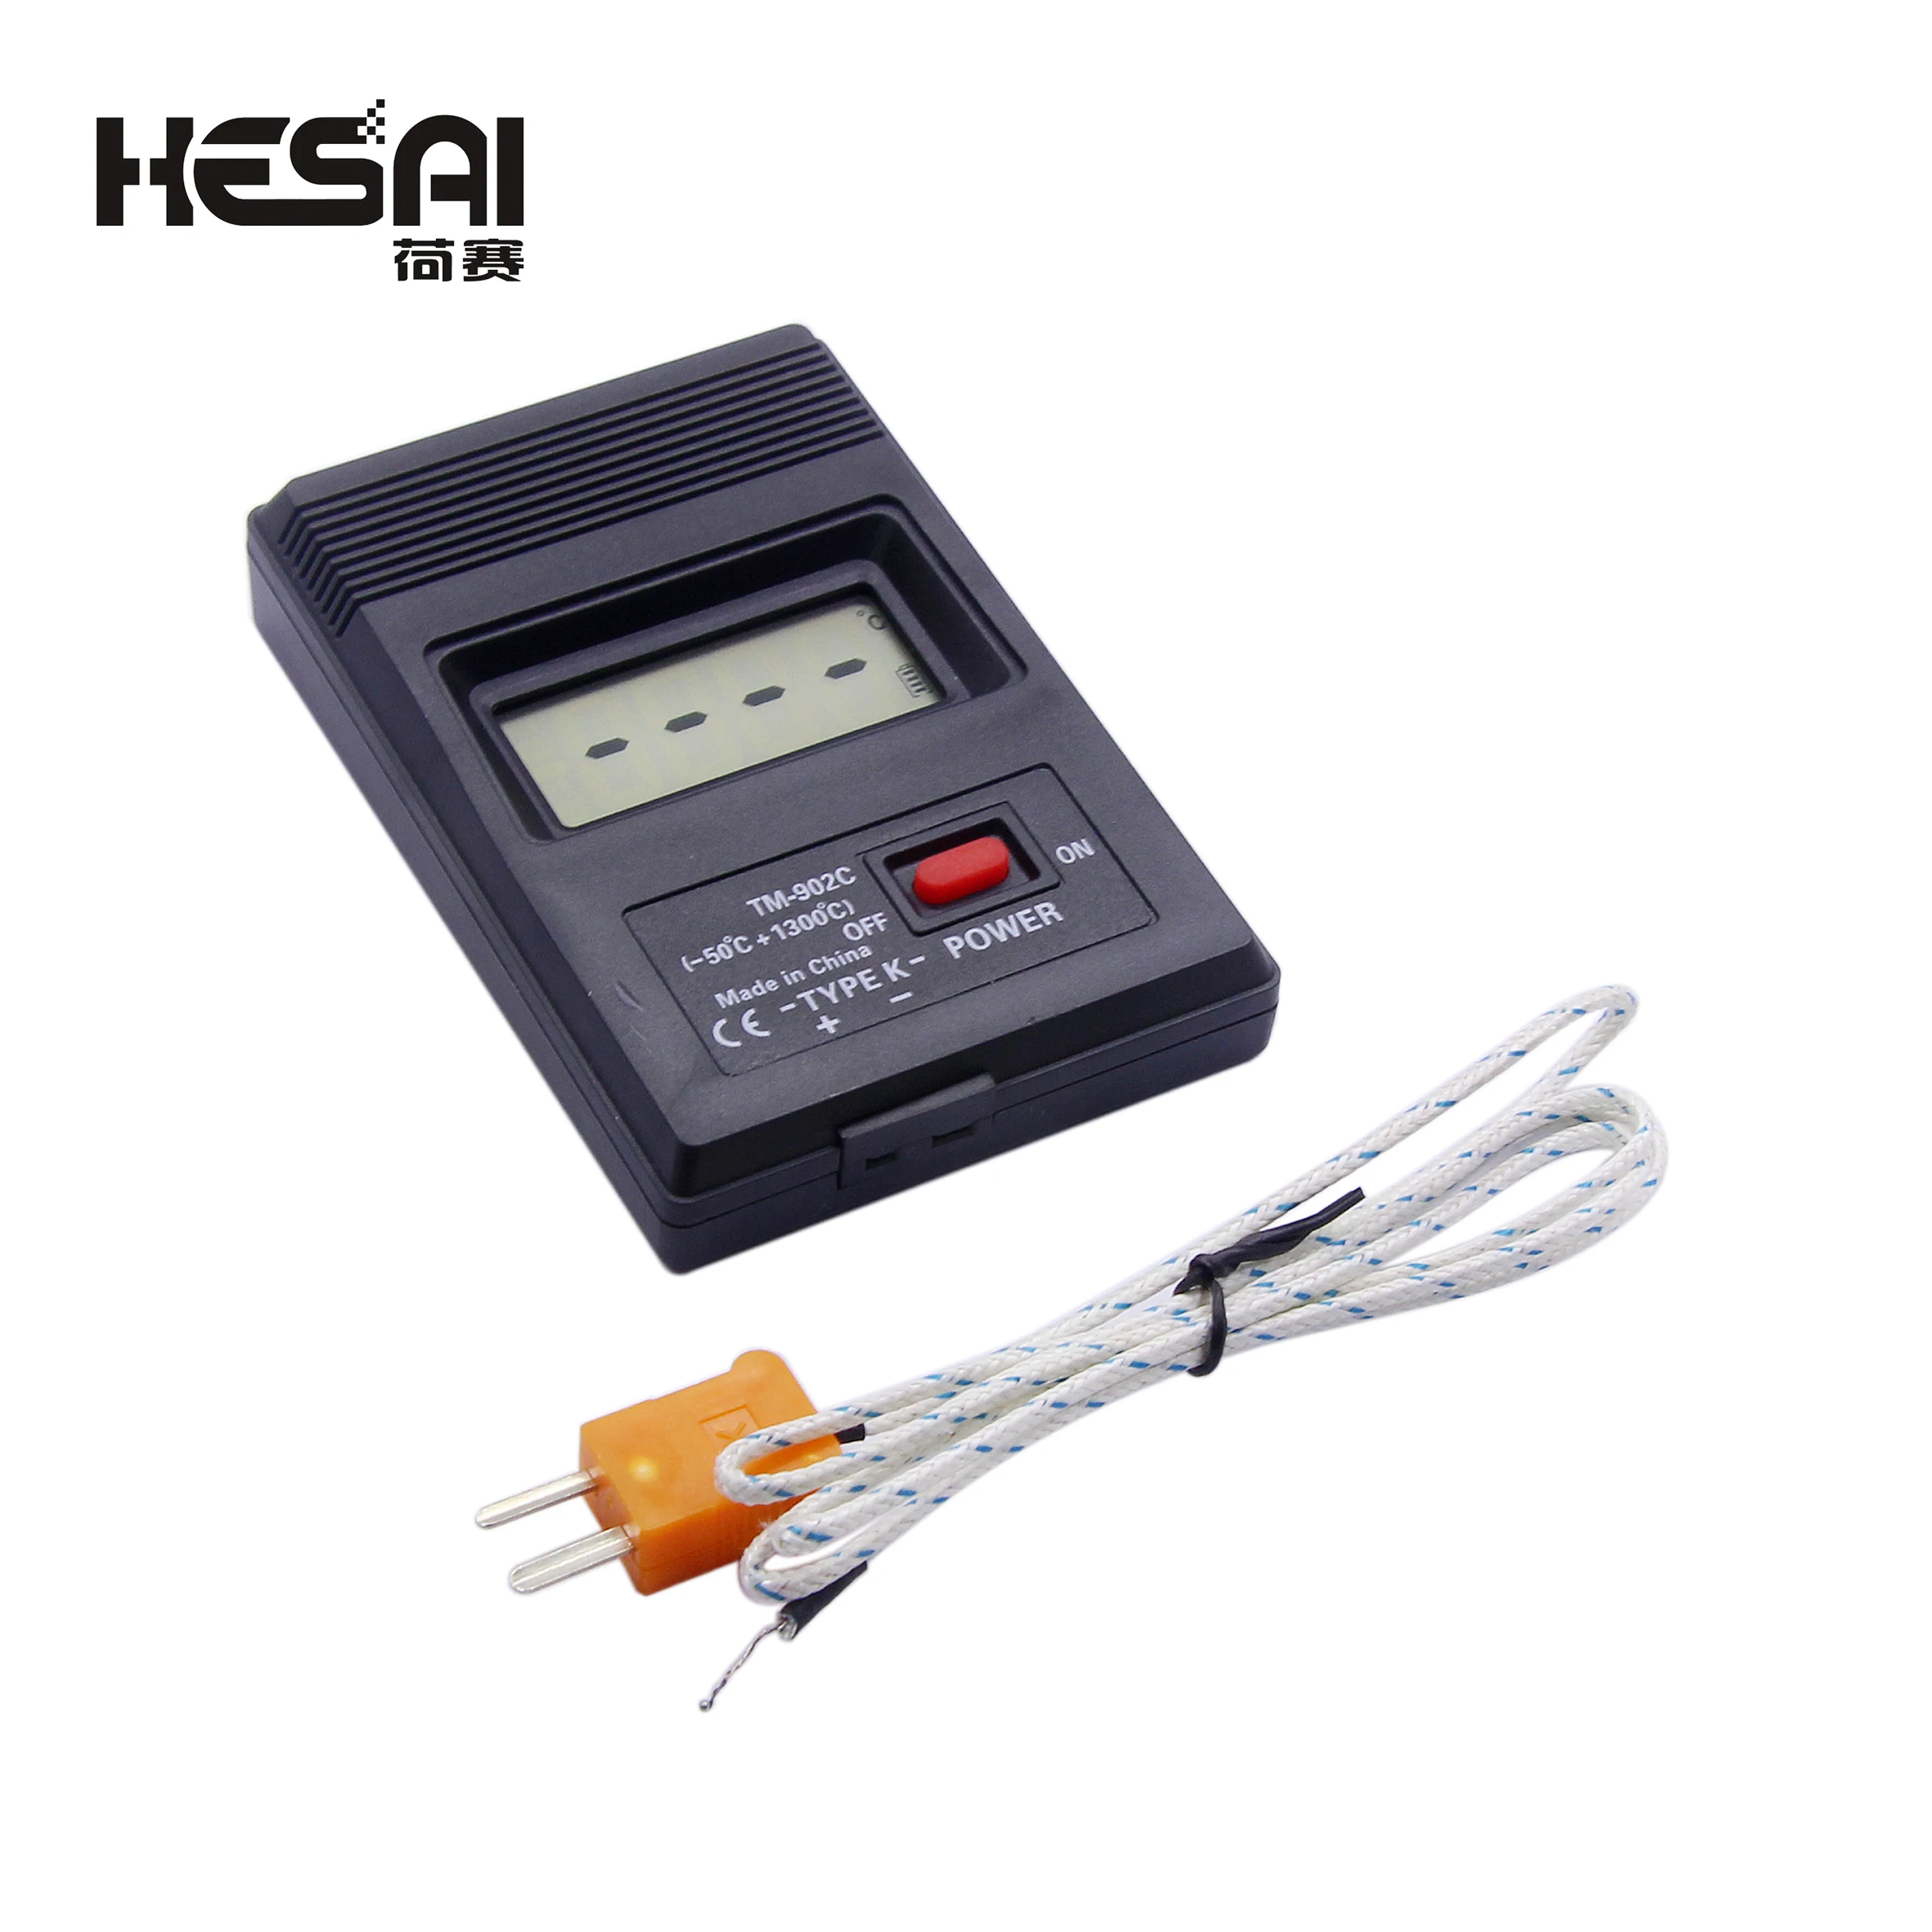 Thermocouple Thermometer (-50C to 1300C)